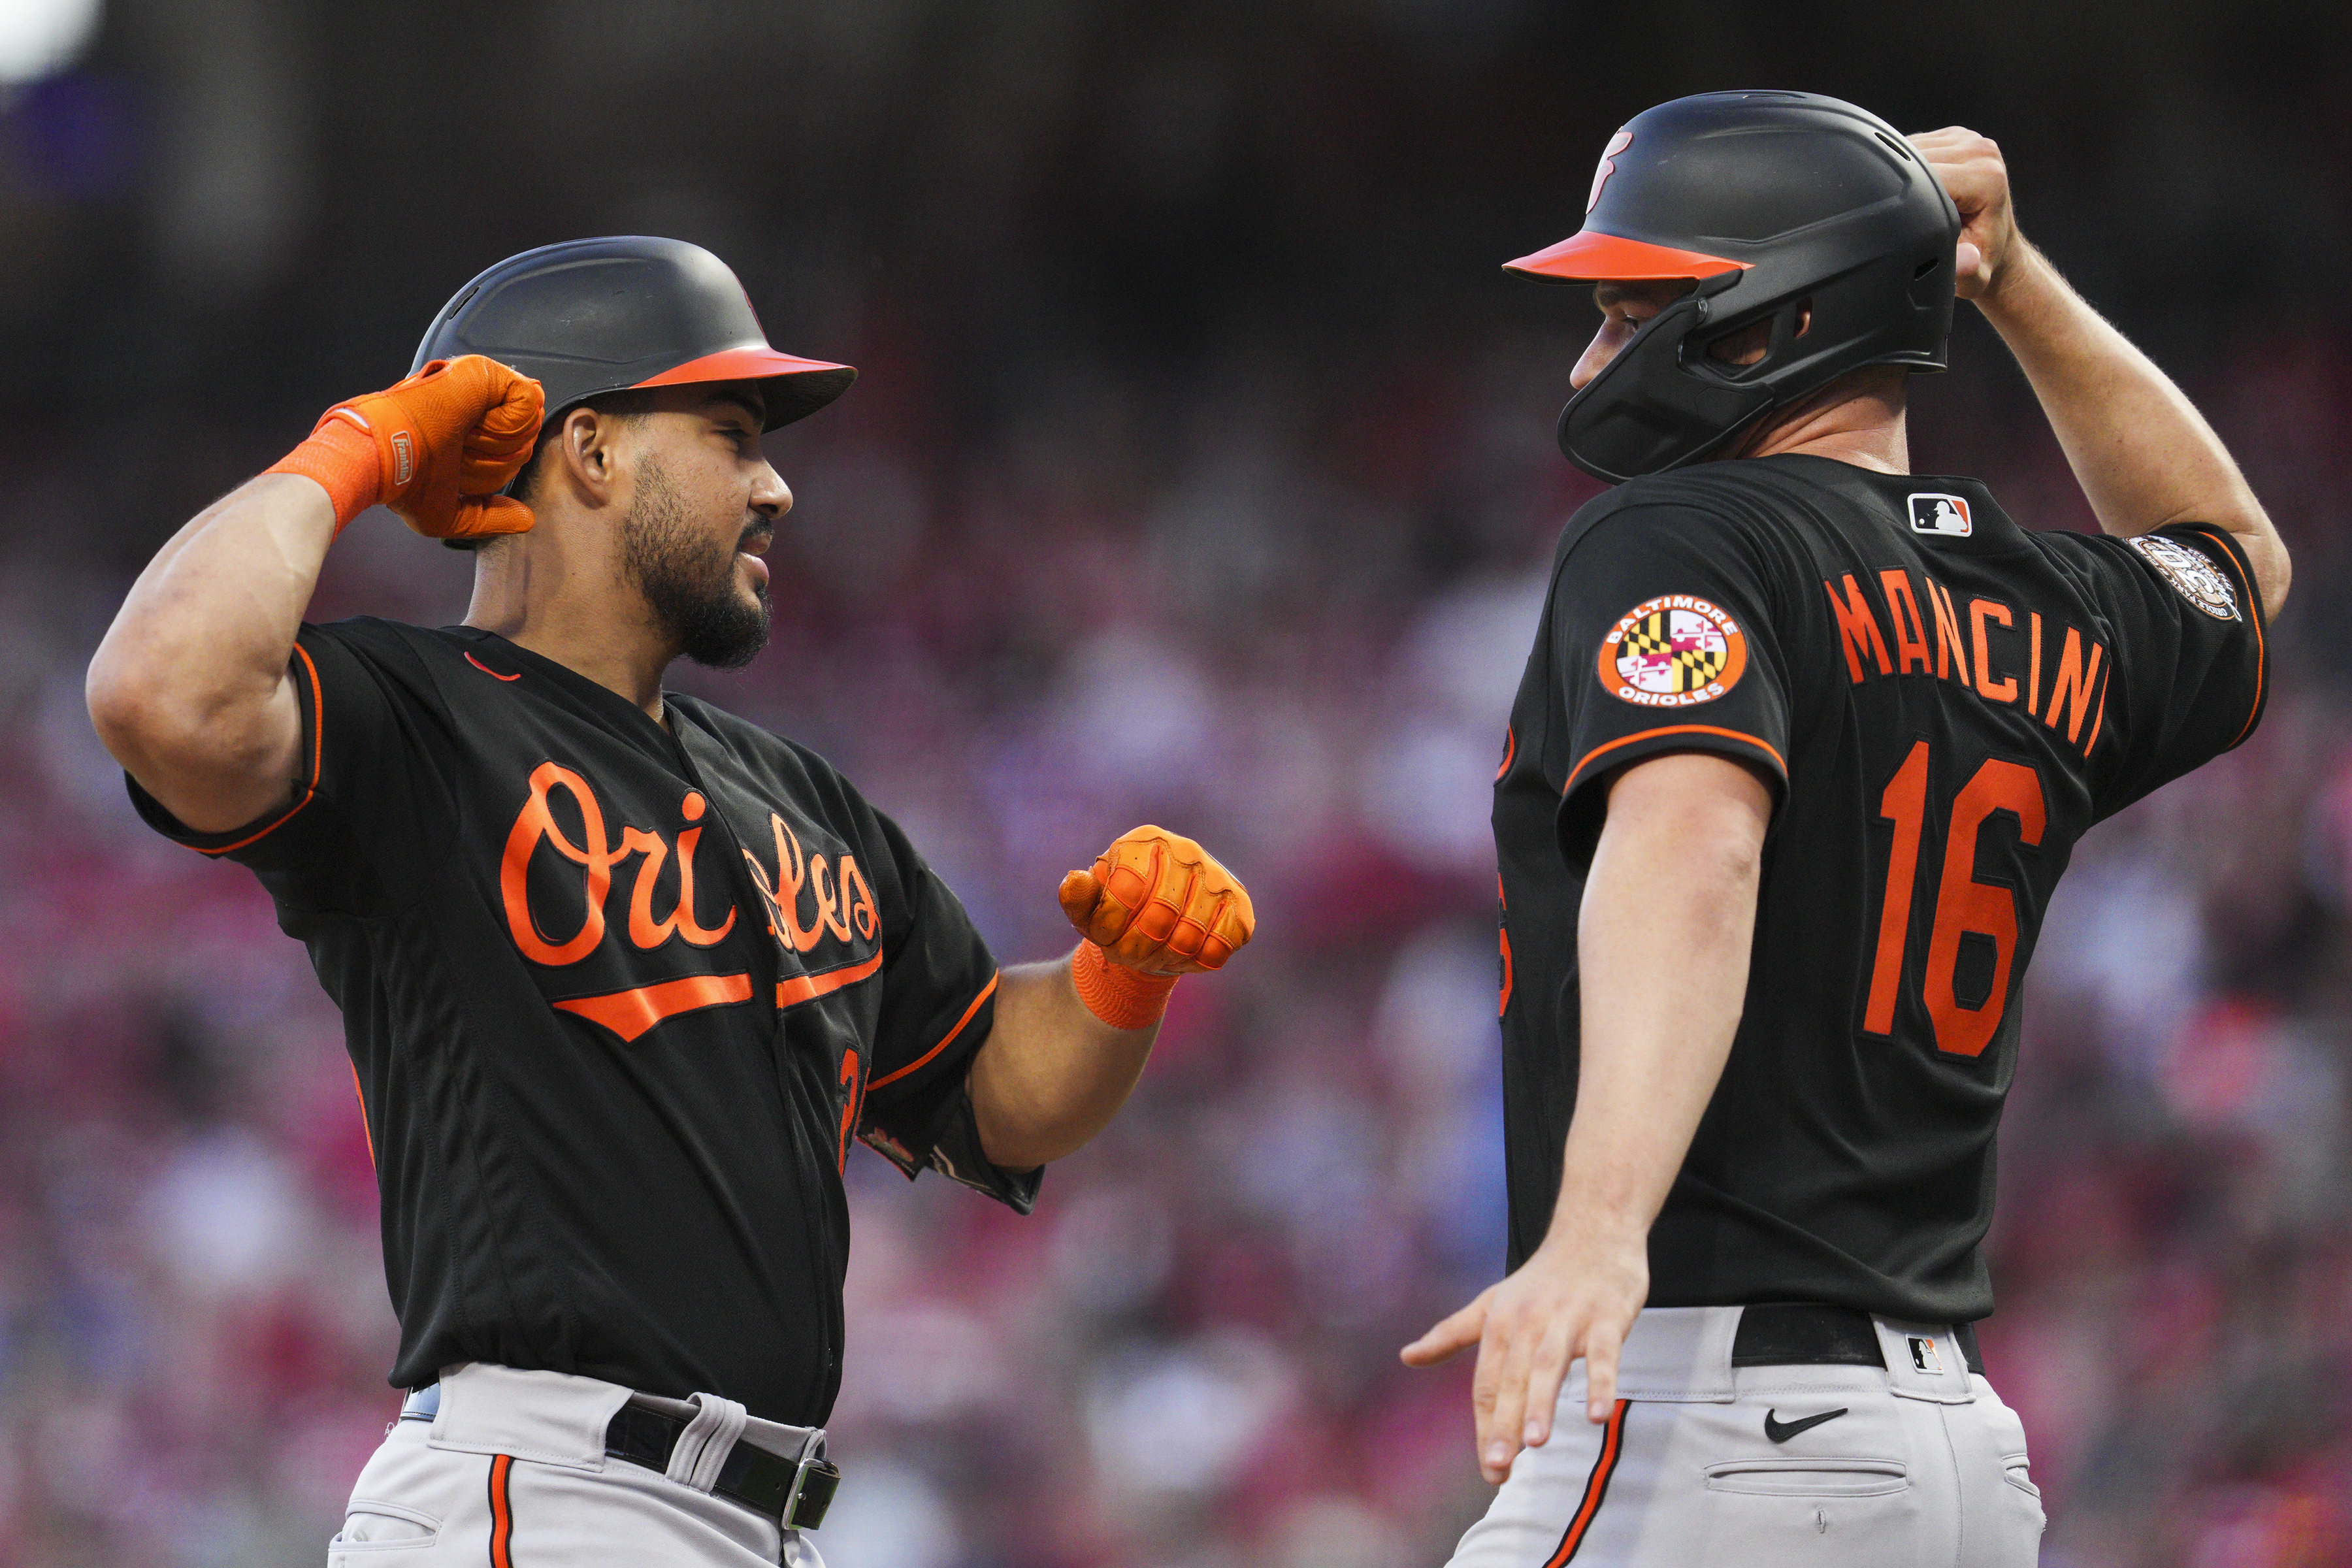 Orioles score 4 in 9th to beat Reds, 6-2, remain above .500 at 100